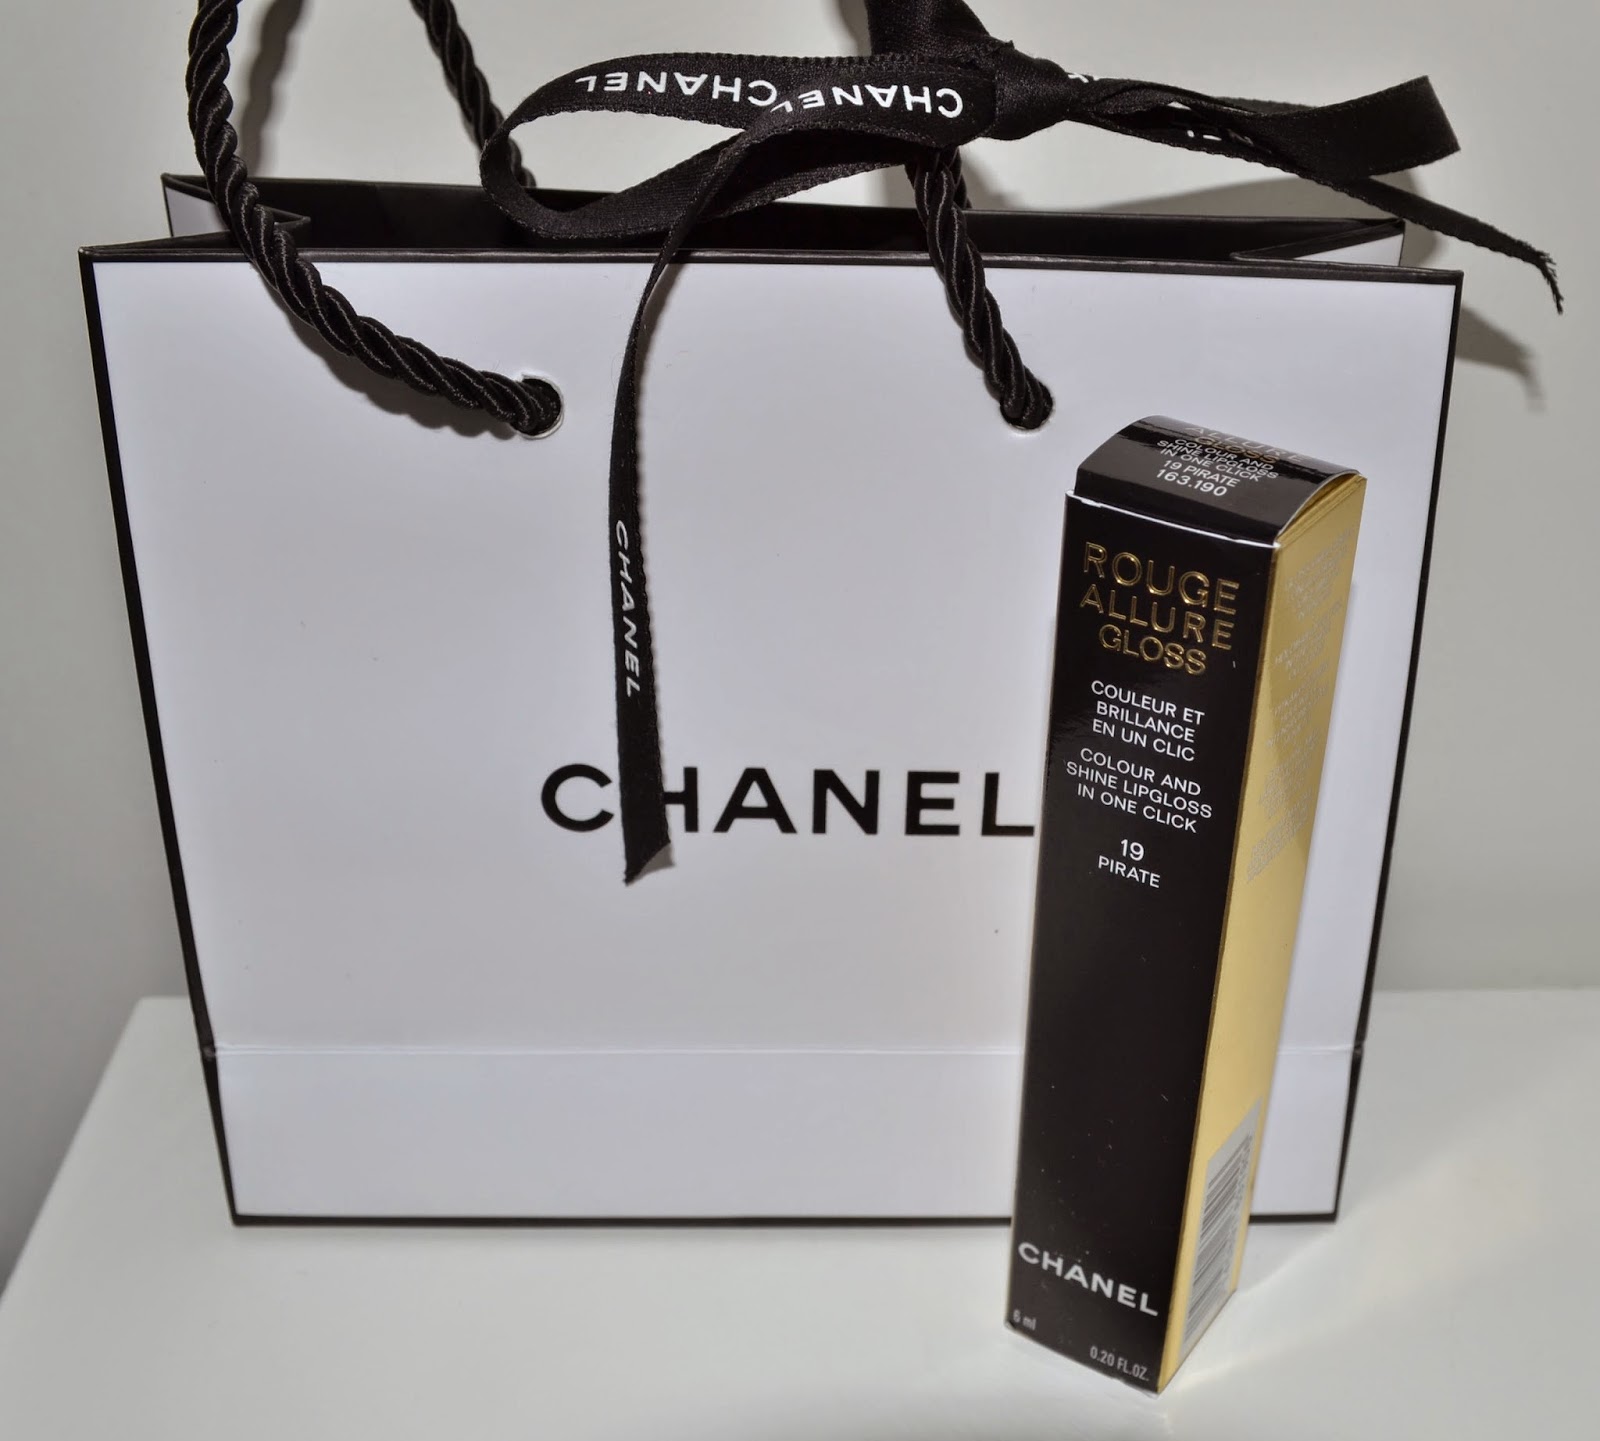 Simply Diana's Makeup Chronicles: Chanel NEW Rouge Allure Gloss (#19 Pirate)